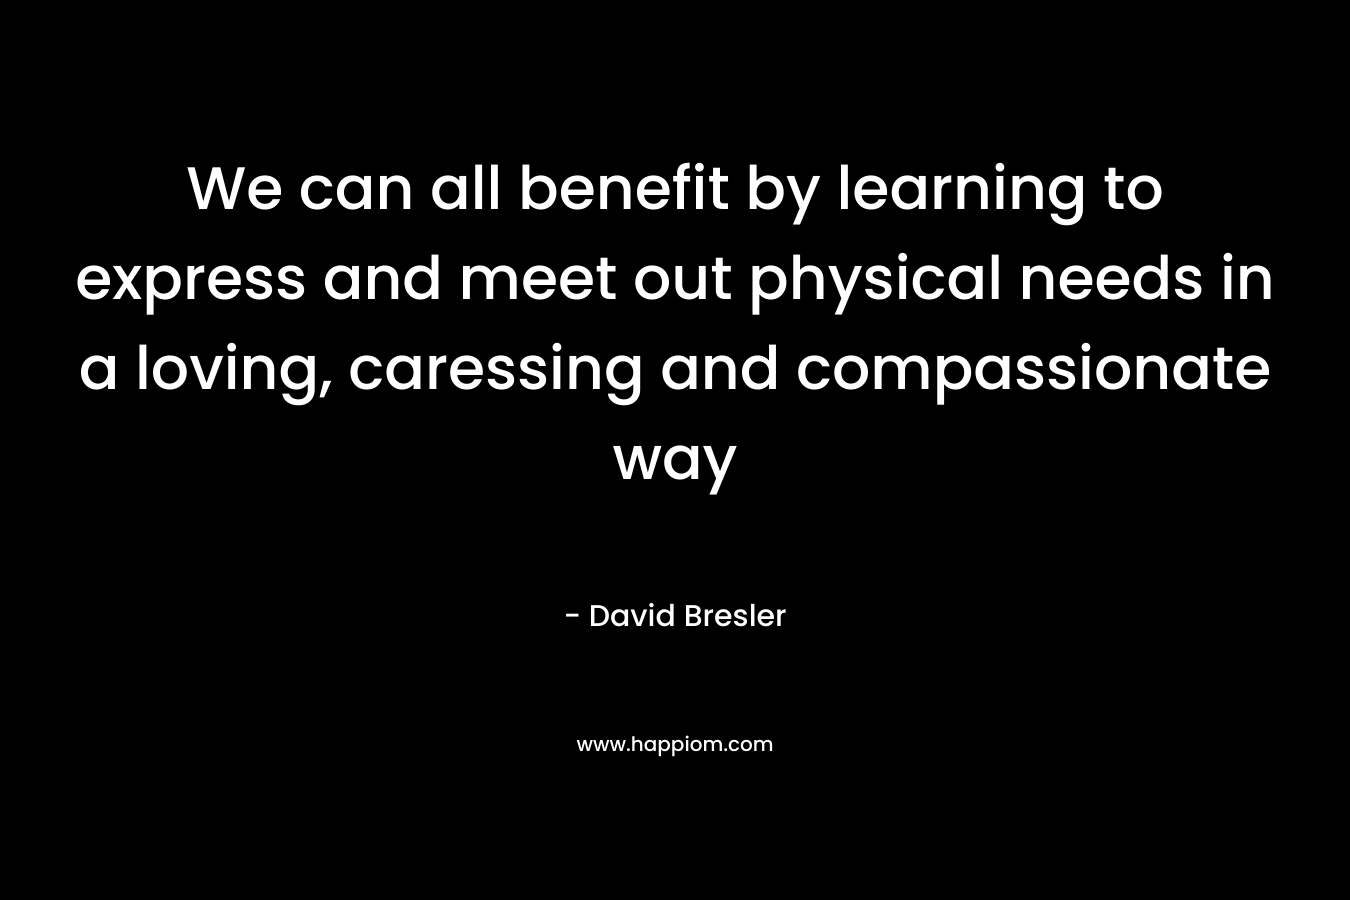 We can all benefit by learning to express and meet out physical needs in a loving, caressing and compassionate way